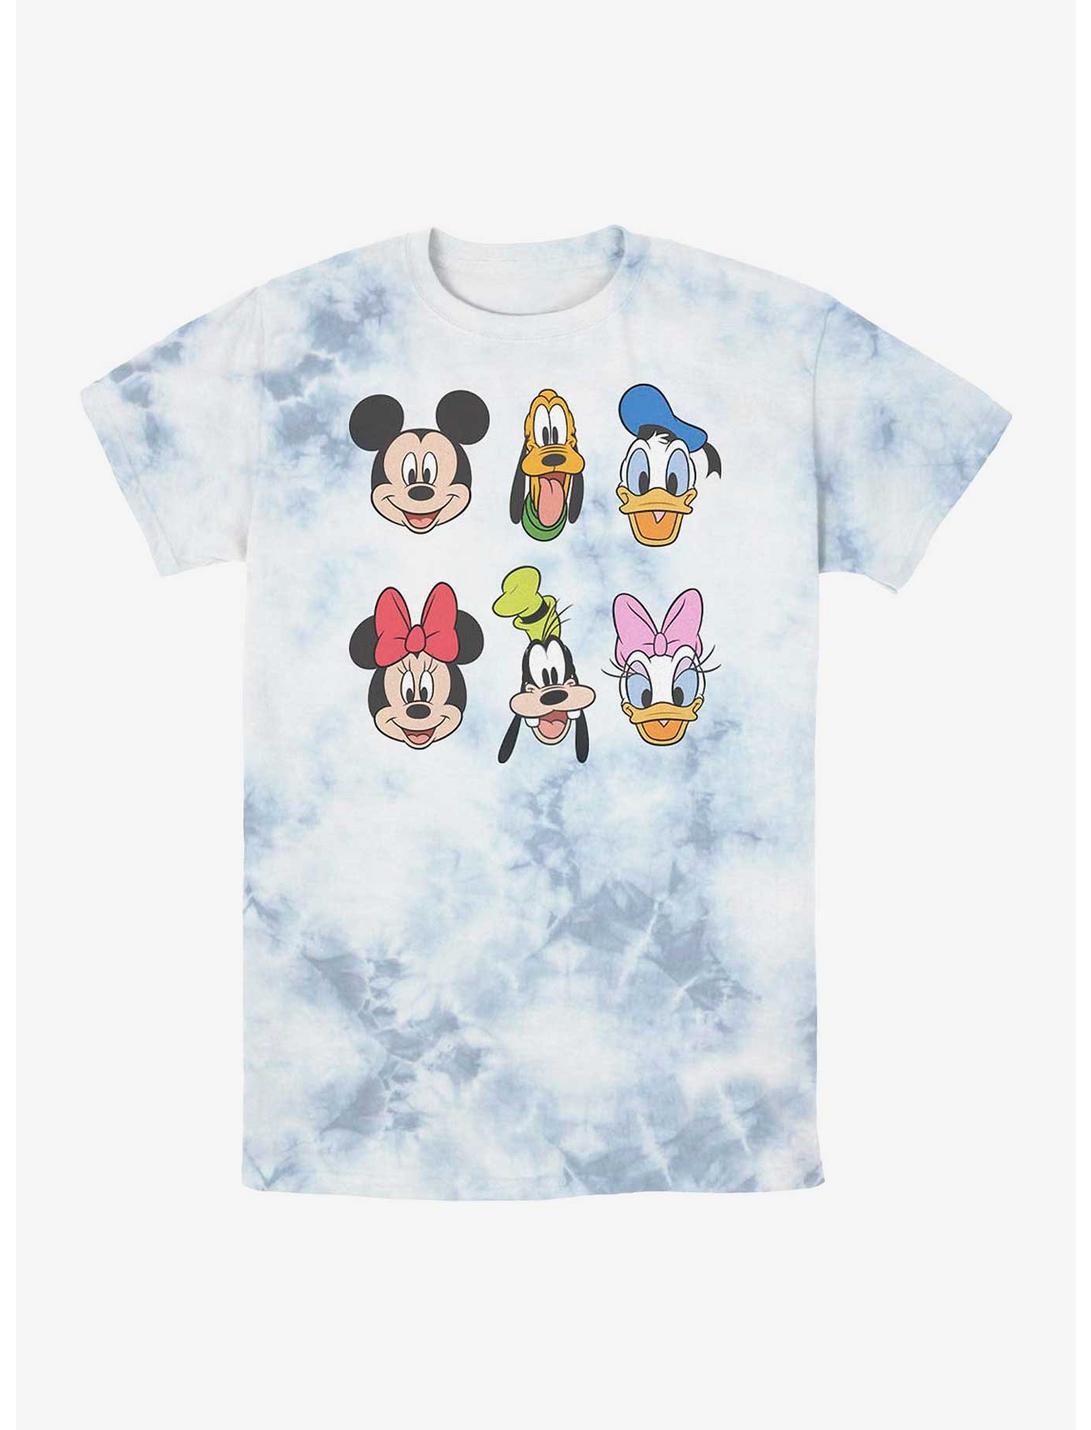 Disney Mickey Mouse And Friends Faces Tie-Dye T-Shirt, WHITEBLUE, hi-res